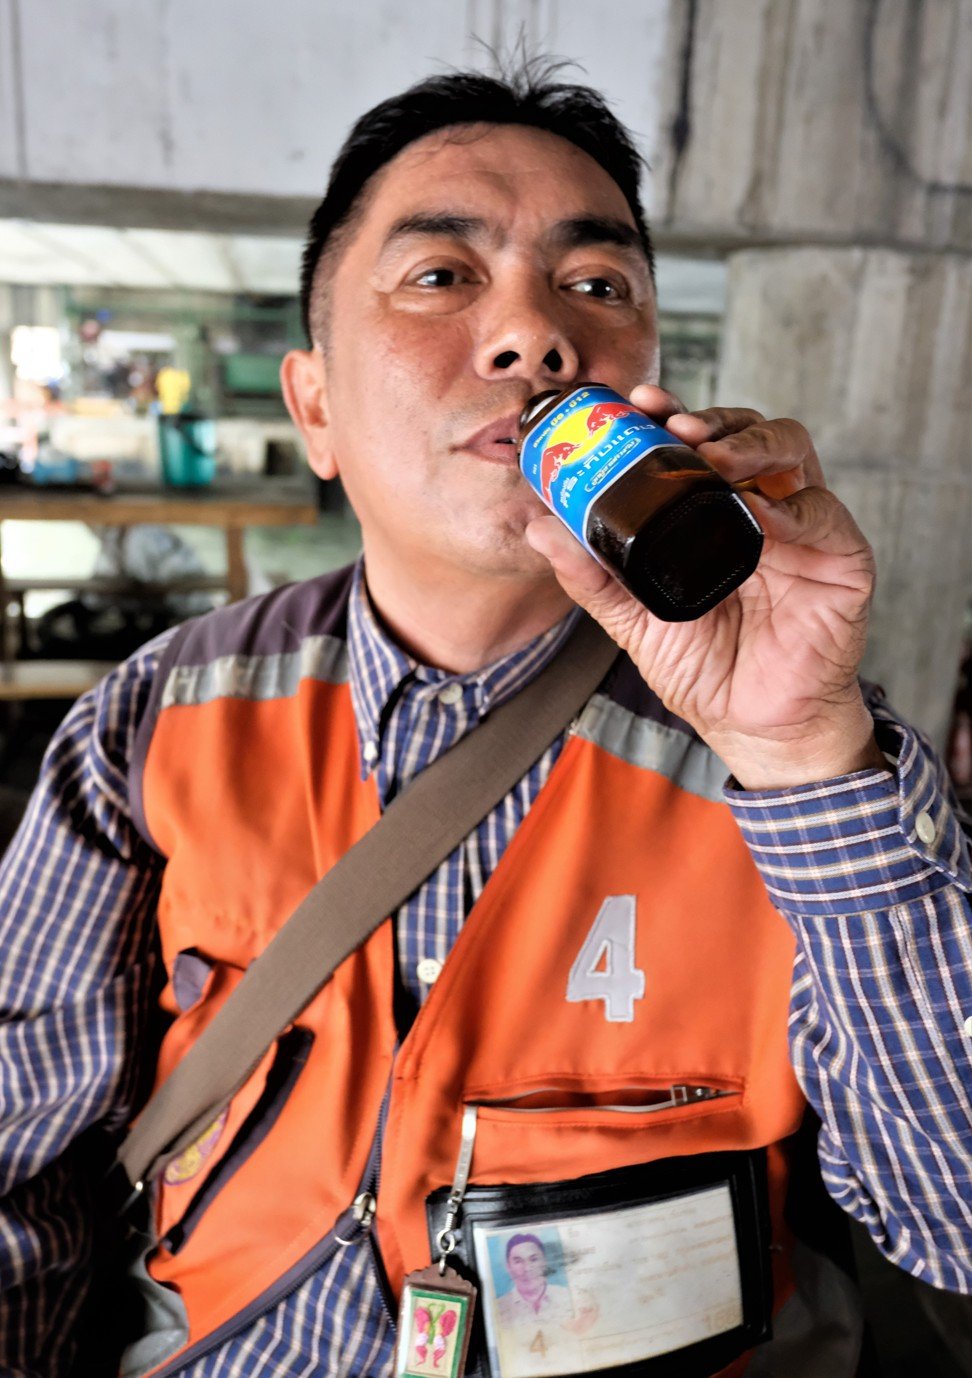 Phakhaphon Kheamthong, a motorcycle taxi driver in Bangkok, drinks a bottle of Krating Daeng during one of his 12-hour shifts. Photo: Tibor Krausz